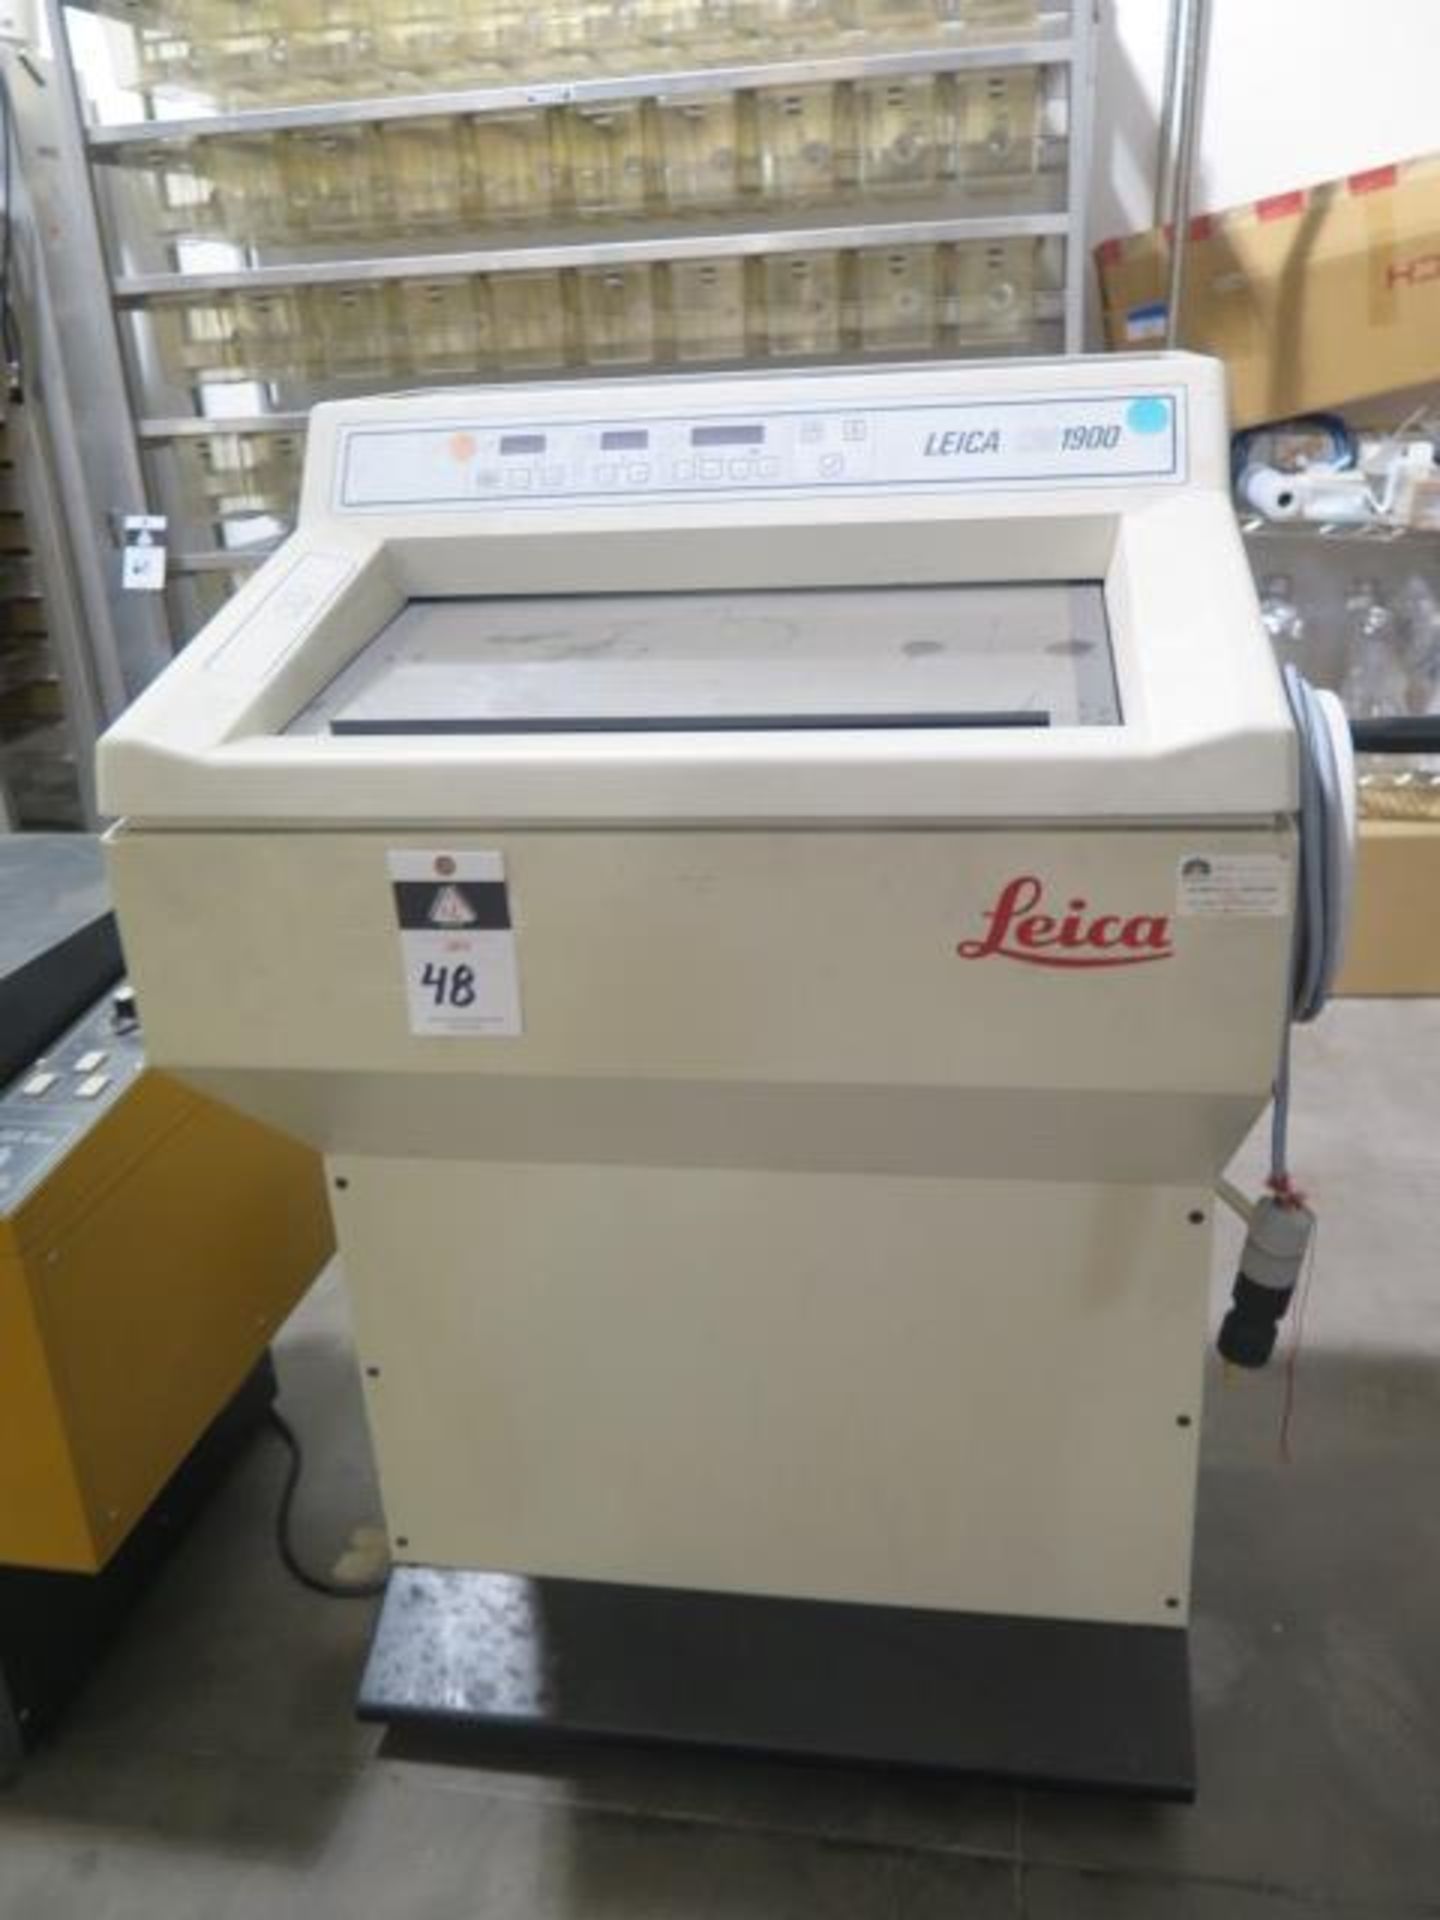 Leica CM1900-6-1 Refrigerated Microtome (SOLD AS-IS - NO WARRANTY)